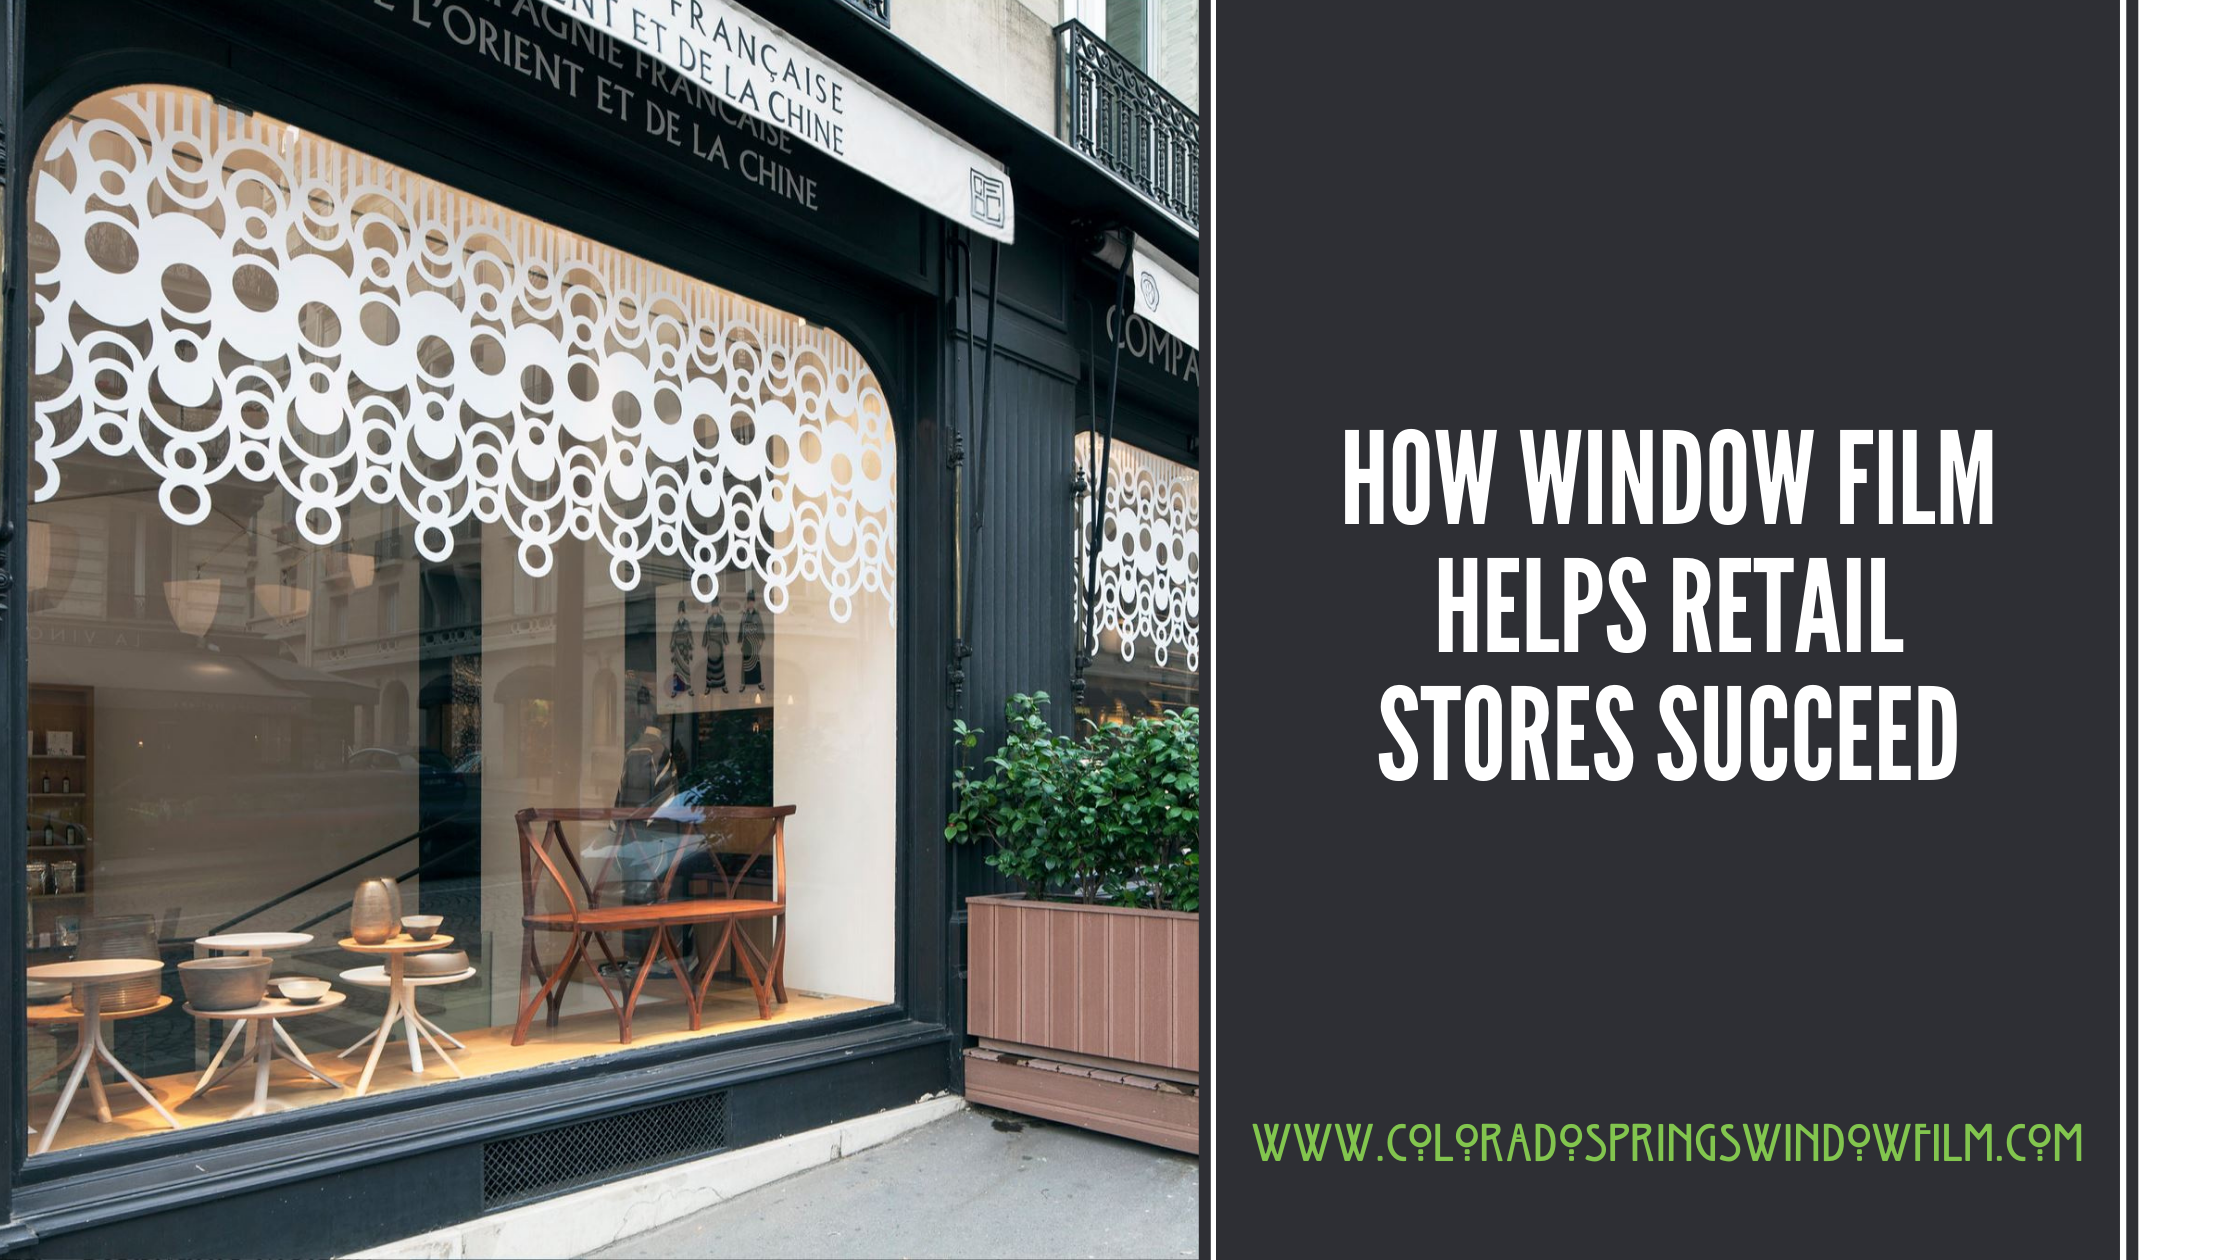 How Window Film Helps Retail Stores Succeed